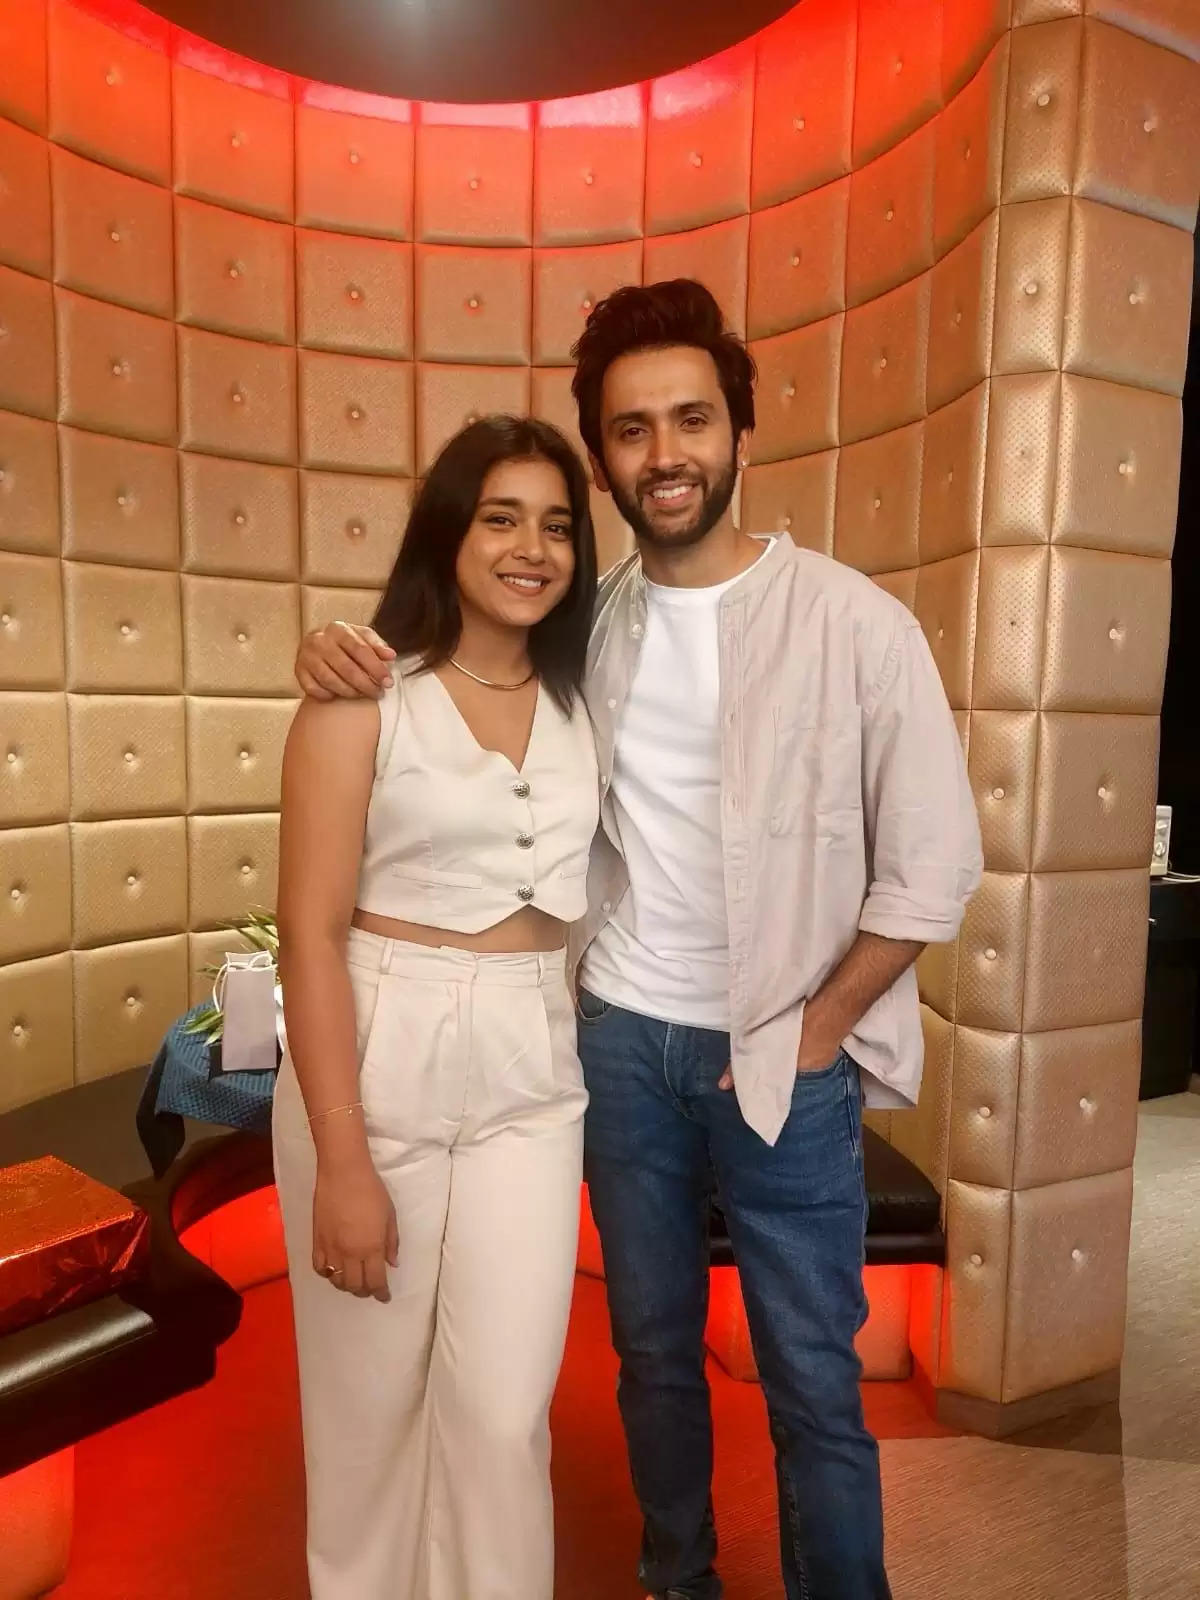 Excitement and Adoration: Sumbul Touqeer and Mishkat Varma wins people’s love at a College Event